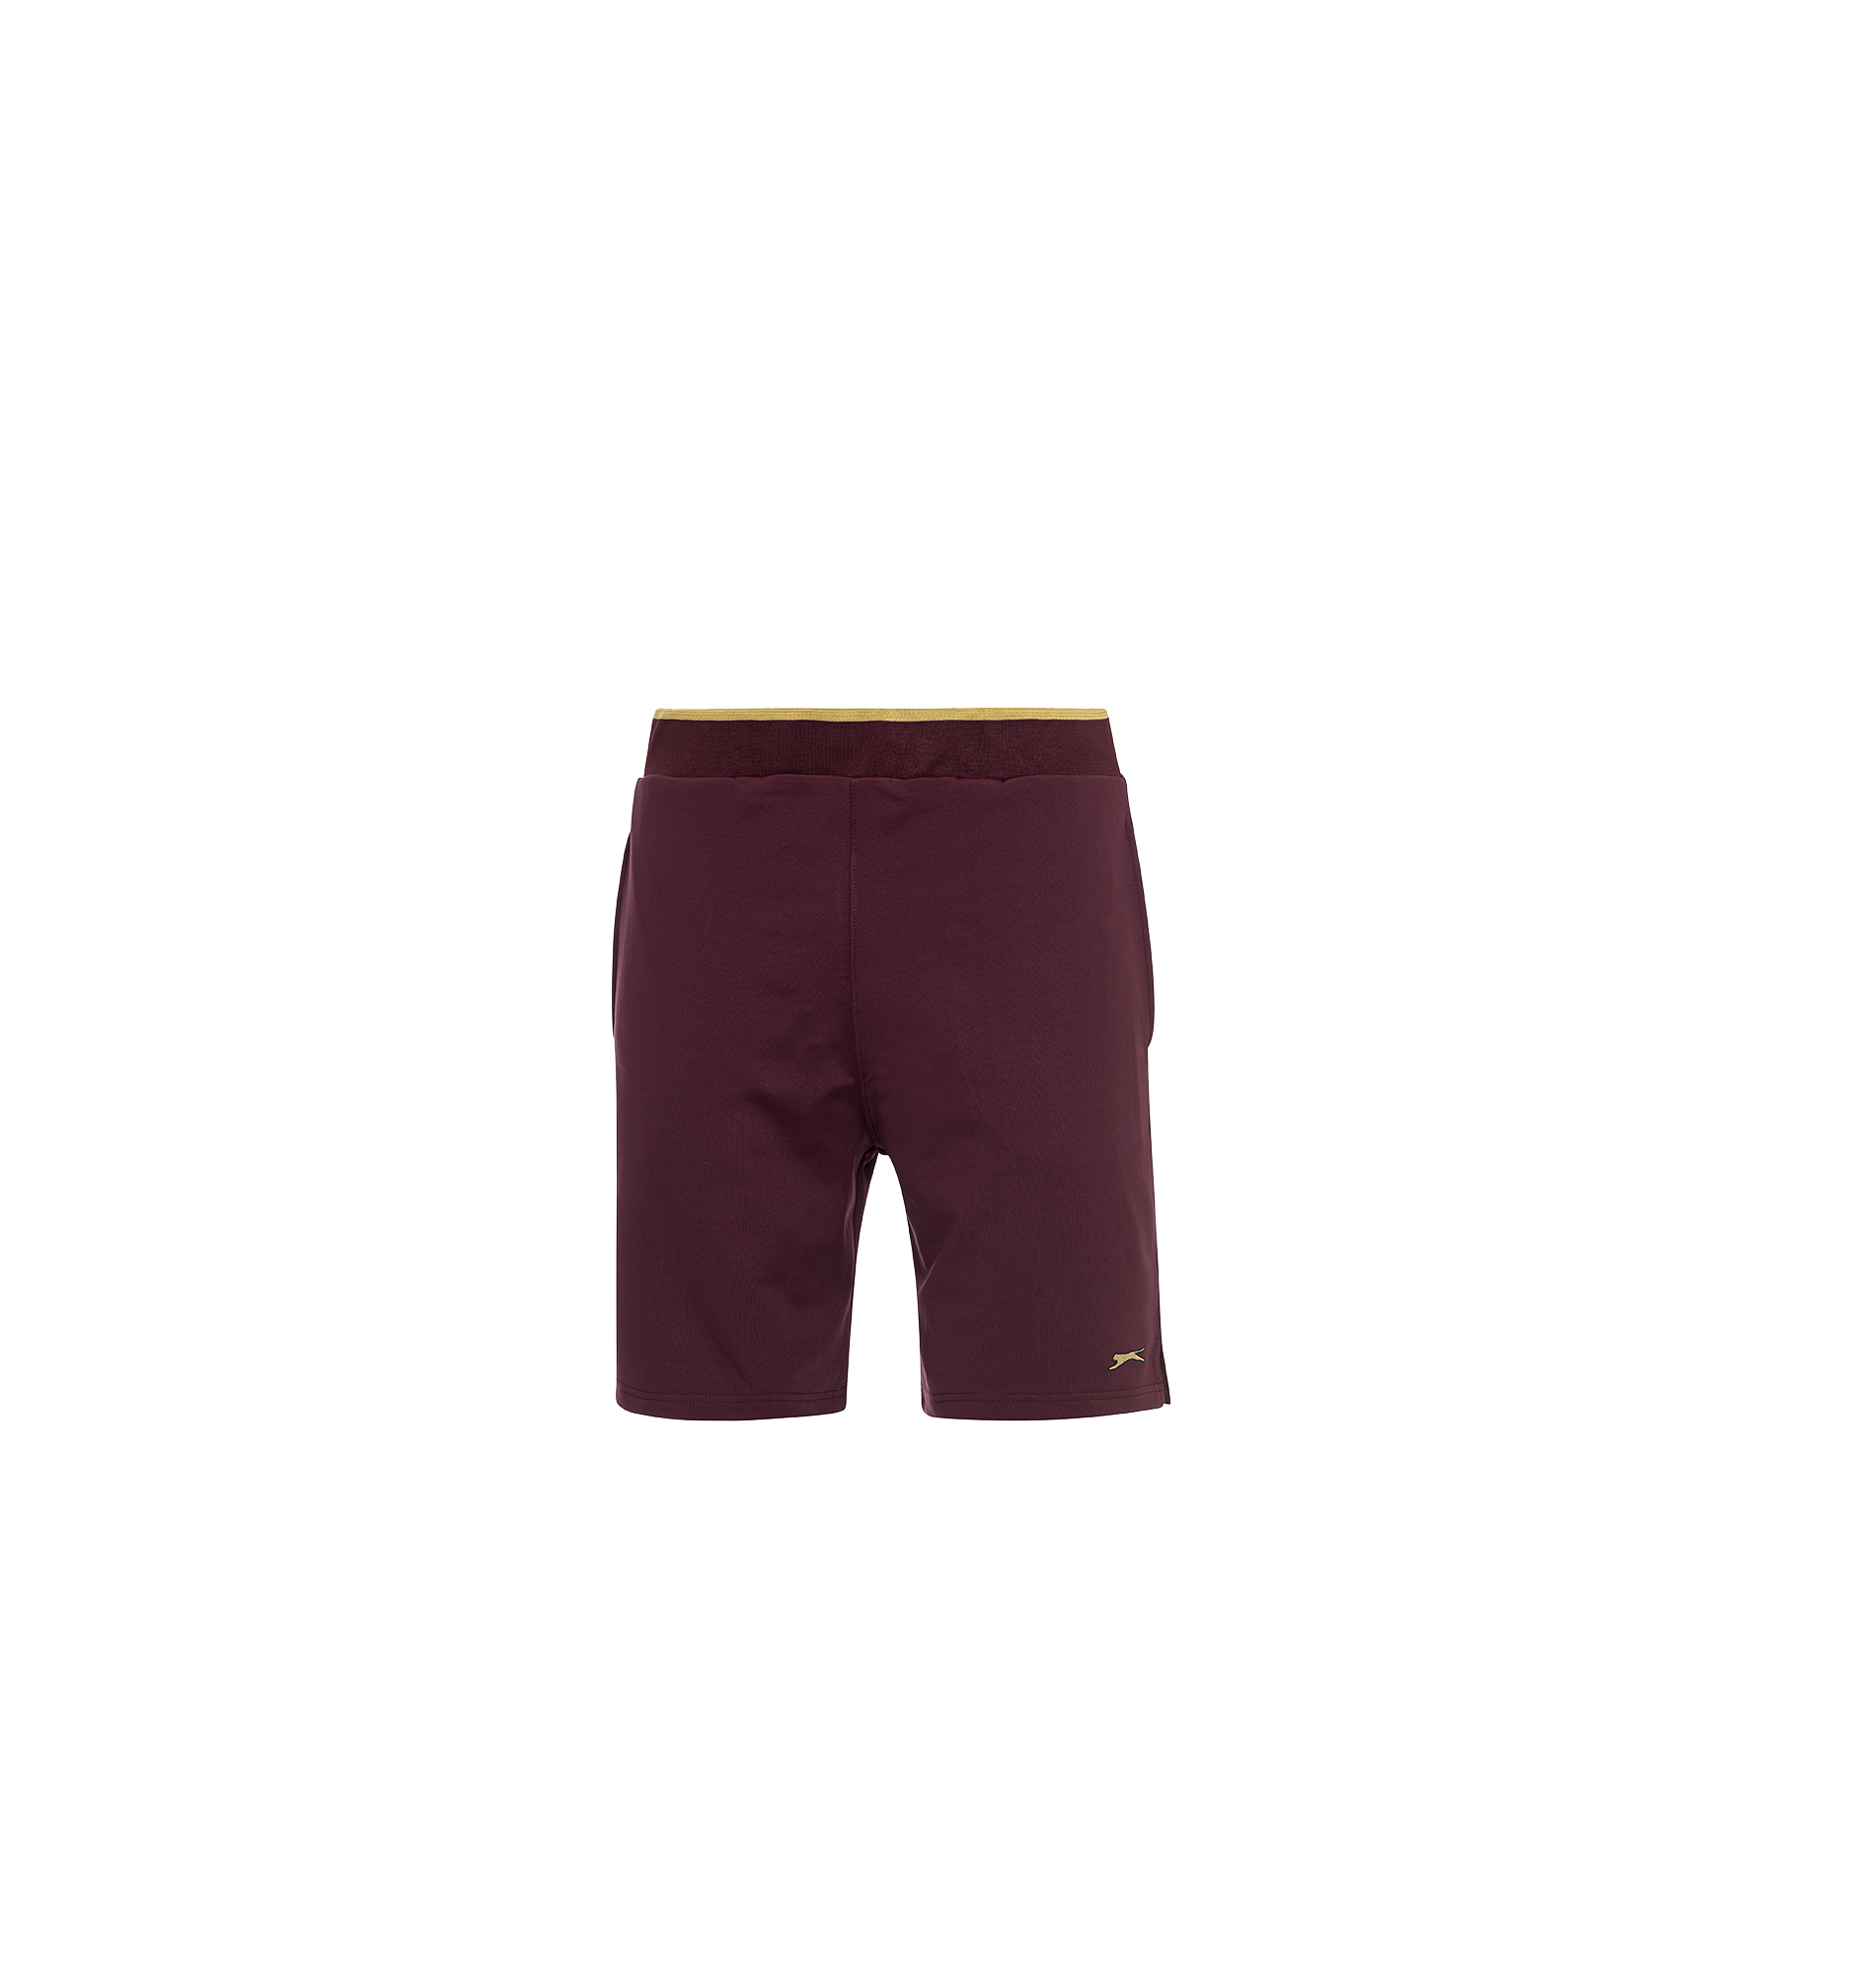 DIEGO TRACK SHORTS HARVARD RED